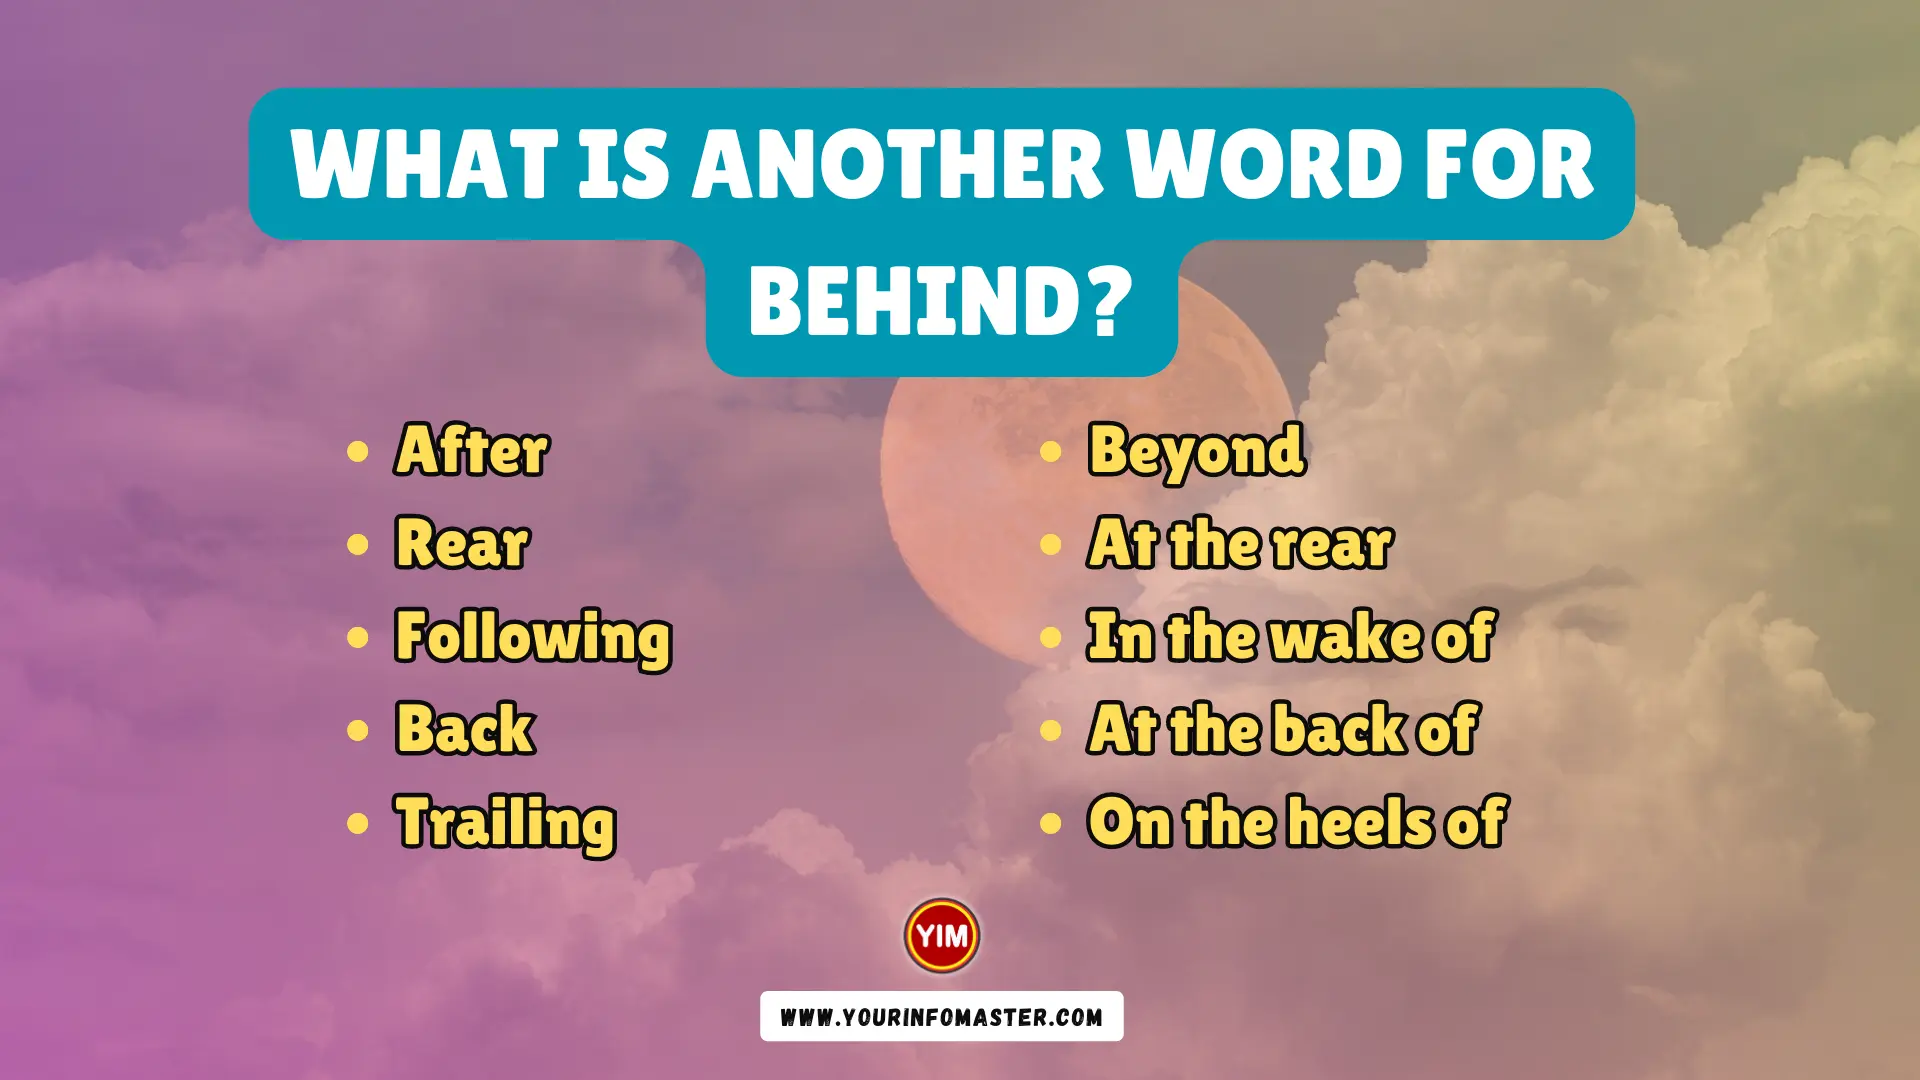 What is another word for Behind